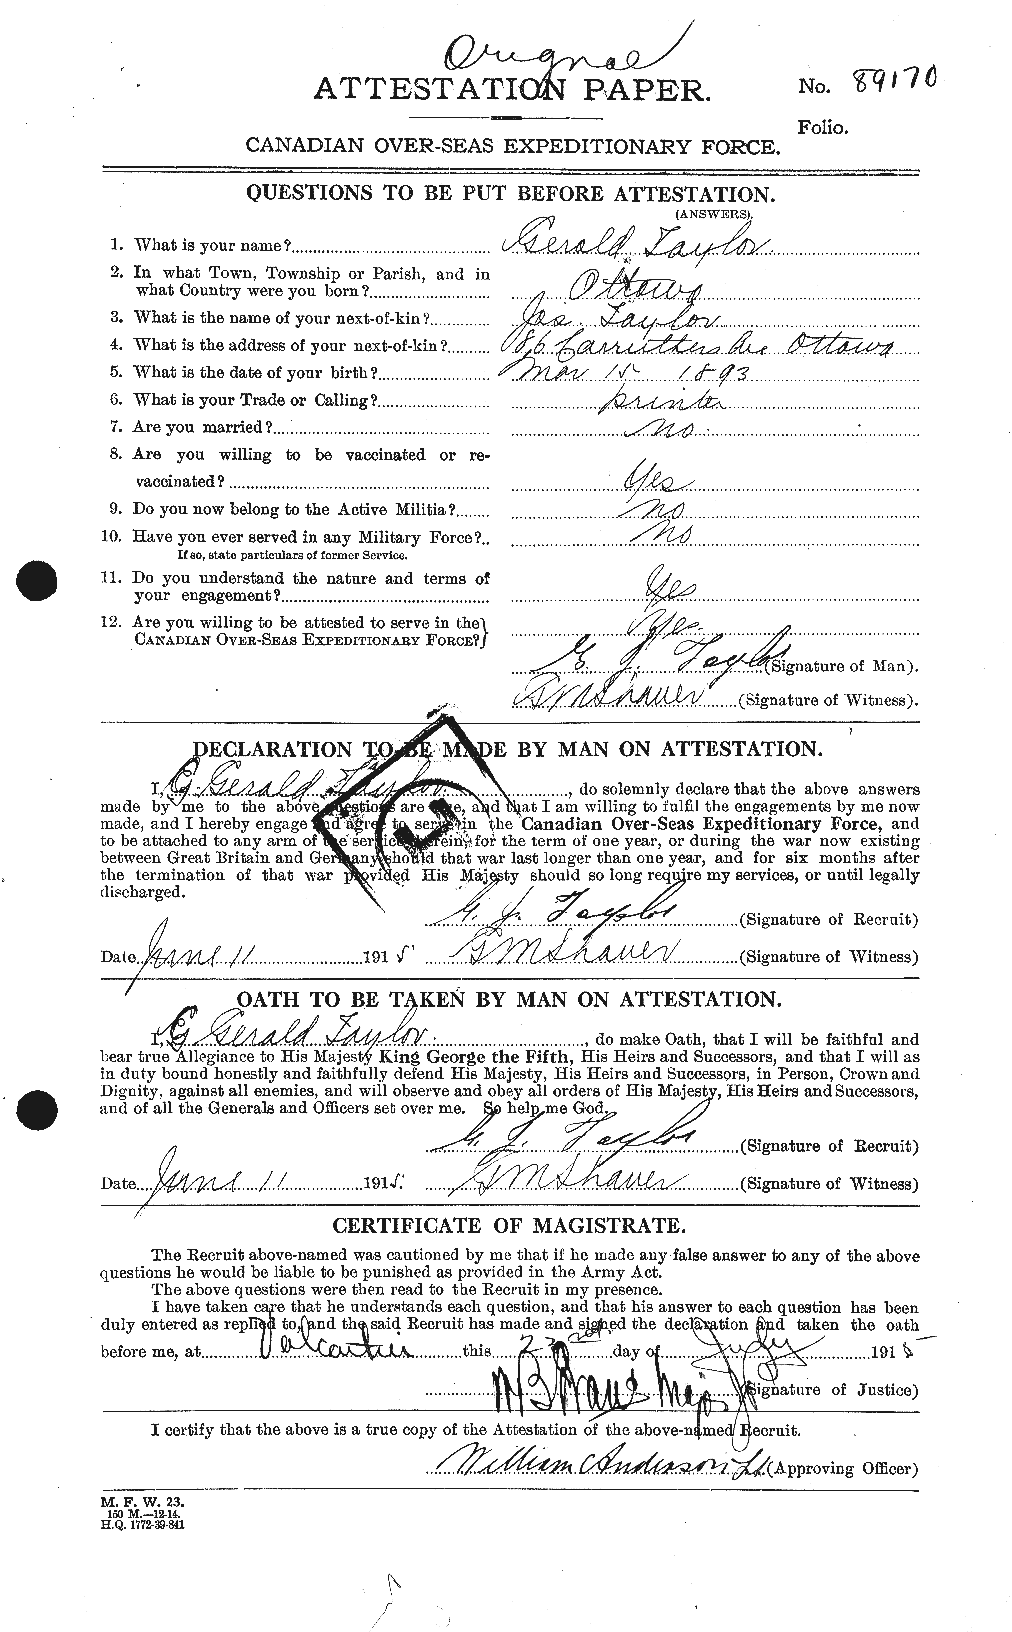 Personnel Records of the First World War - CEF 626375a